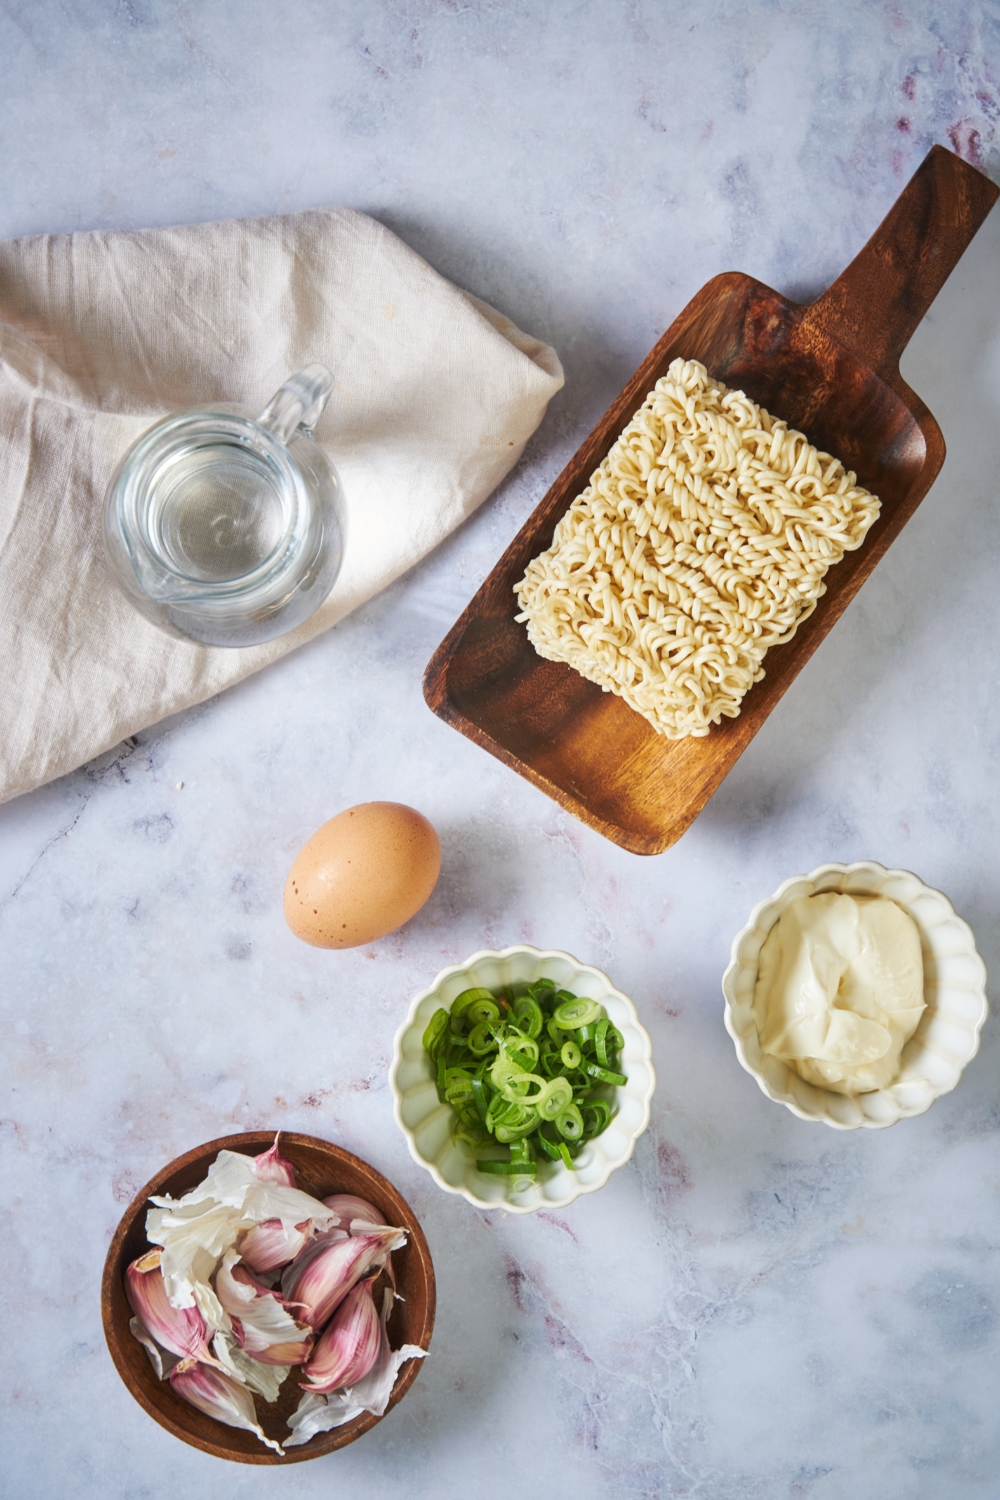 A block of ramen on a wood board, a bowl of garlic, an egg, bowl of scallions, and a bowl of mayo all on a grey counter.